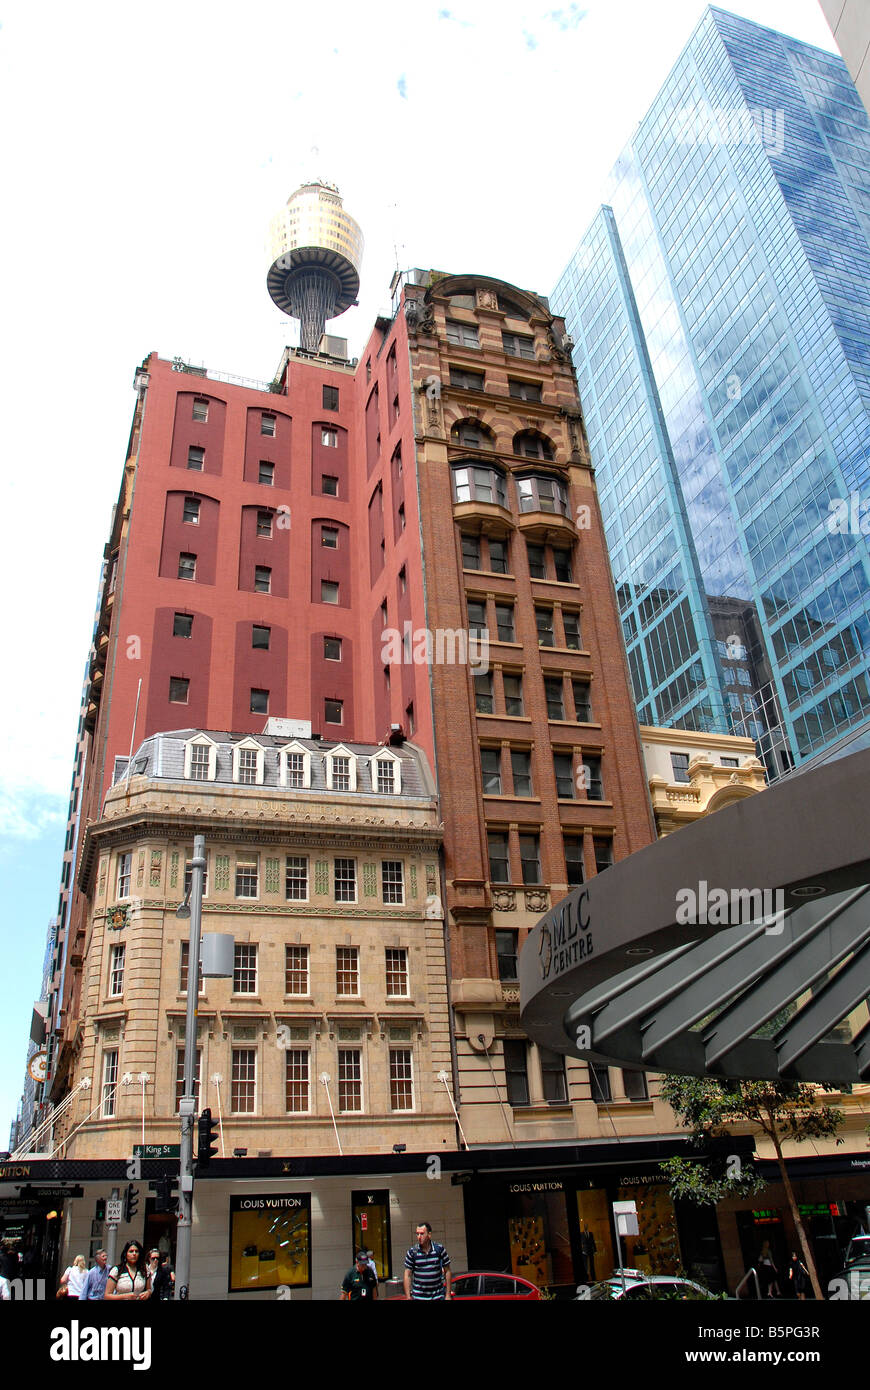 Modern and old buildings, Louis Vuitton house, Sydney, Australia